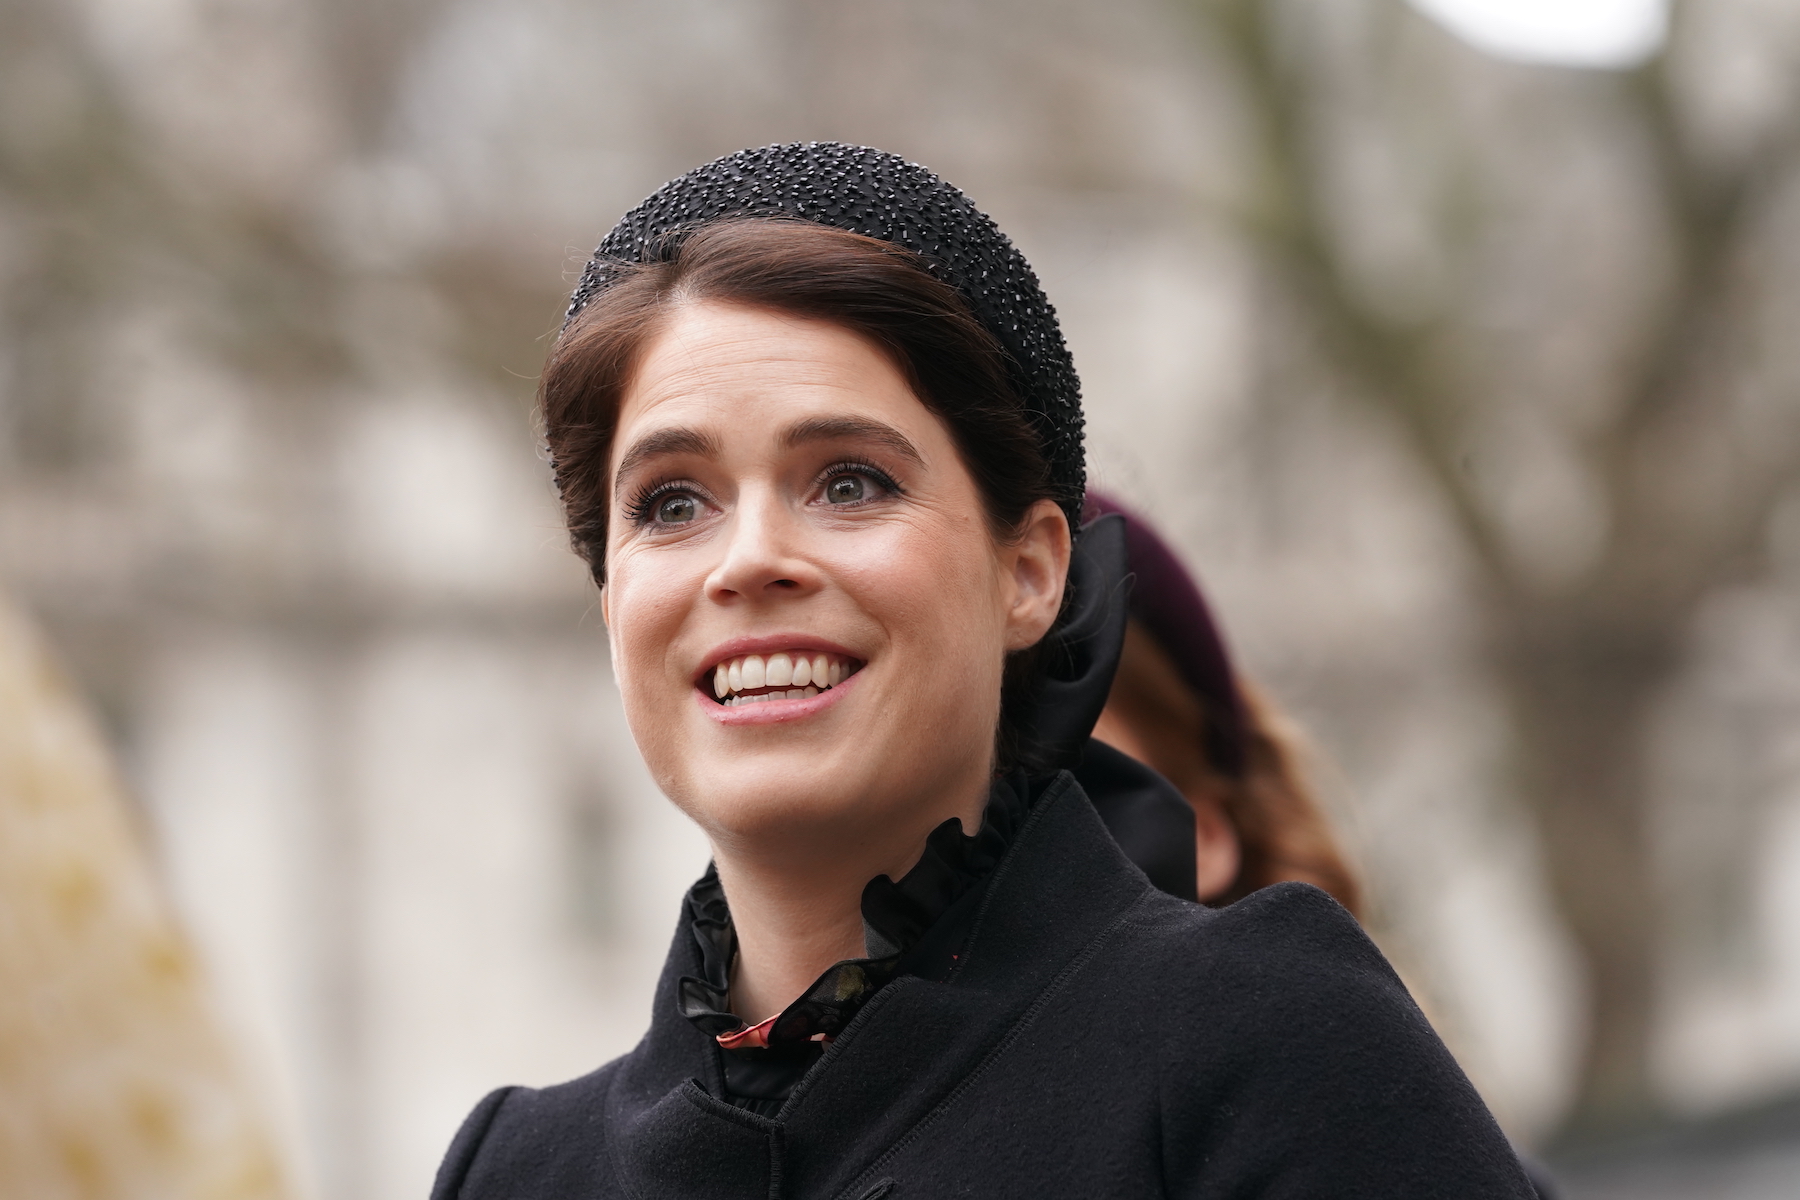 Princess Eugenie dressed in all black and smiling outdoors